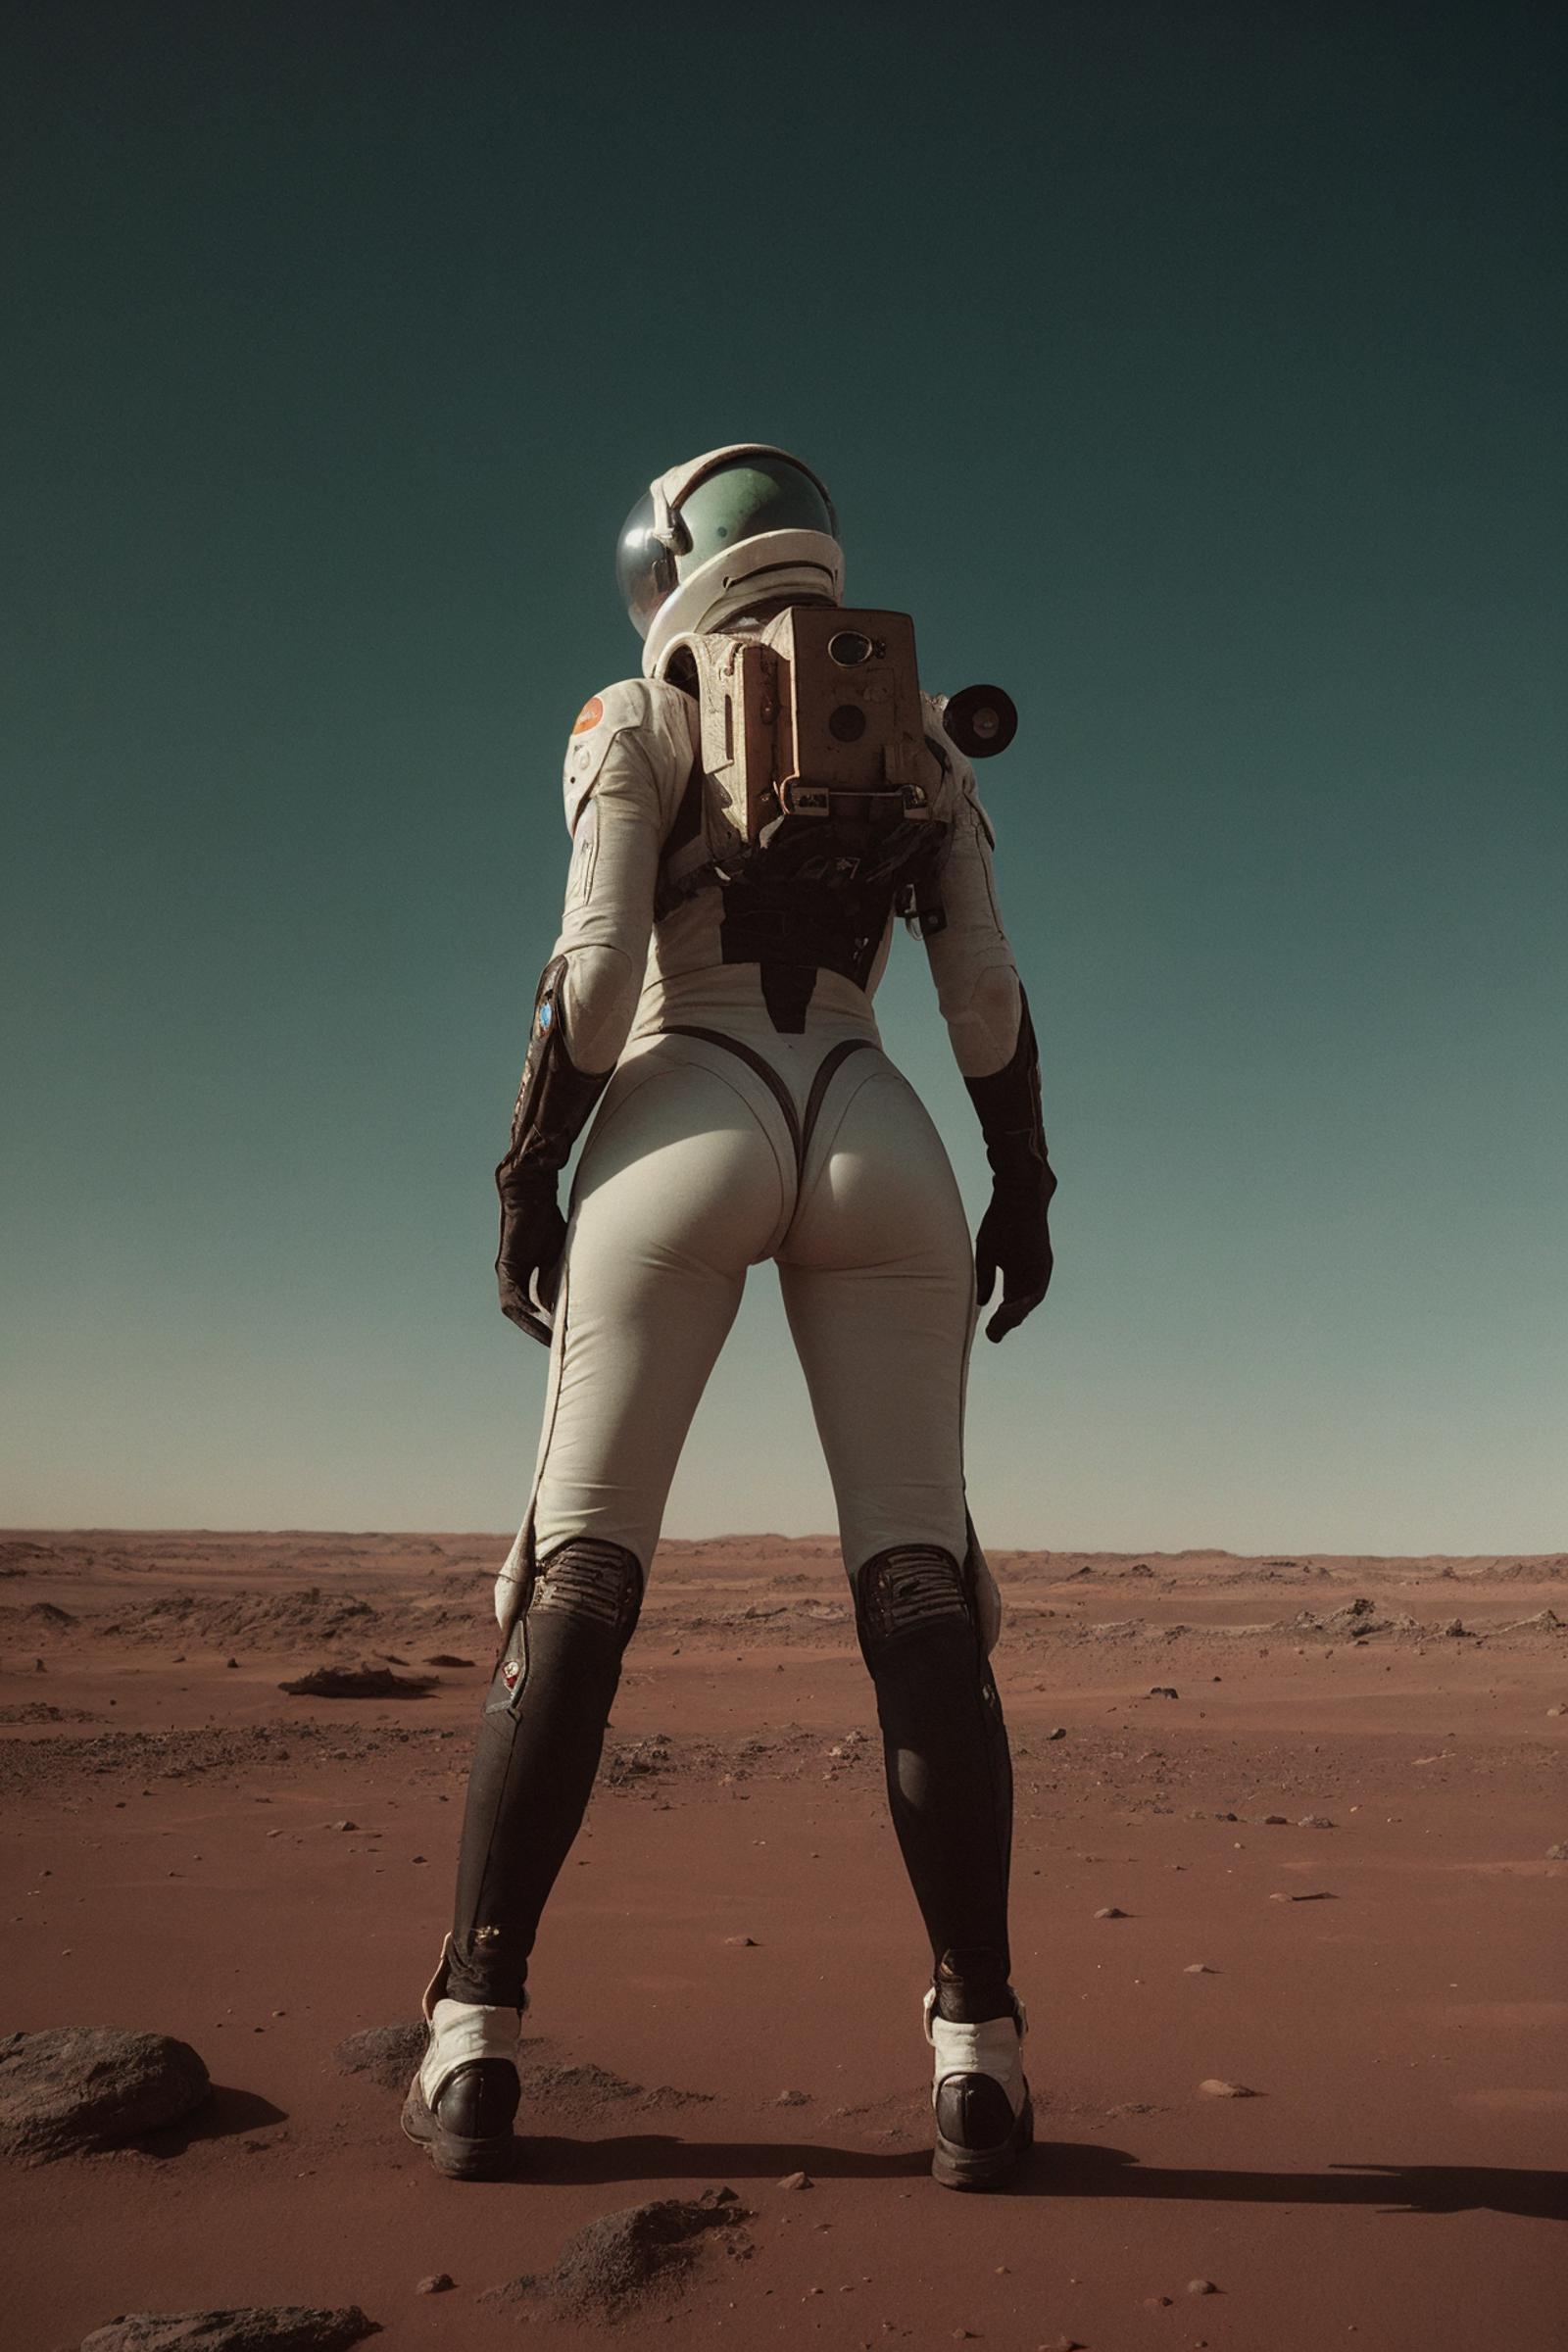 A woman in a white spacesuit stands on a desert planet, facing away from the camera. She is wearing a backpack, which is likely part of her space suit, and appears to be exploring the open terrain. The image captures the vastness of the desert and the woman's adventurous spirit.